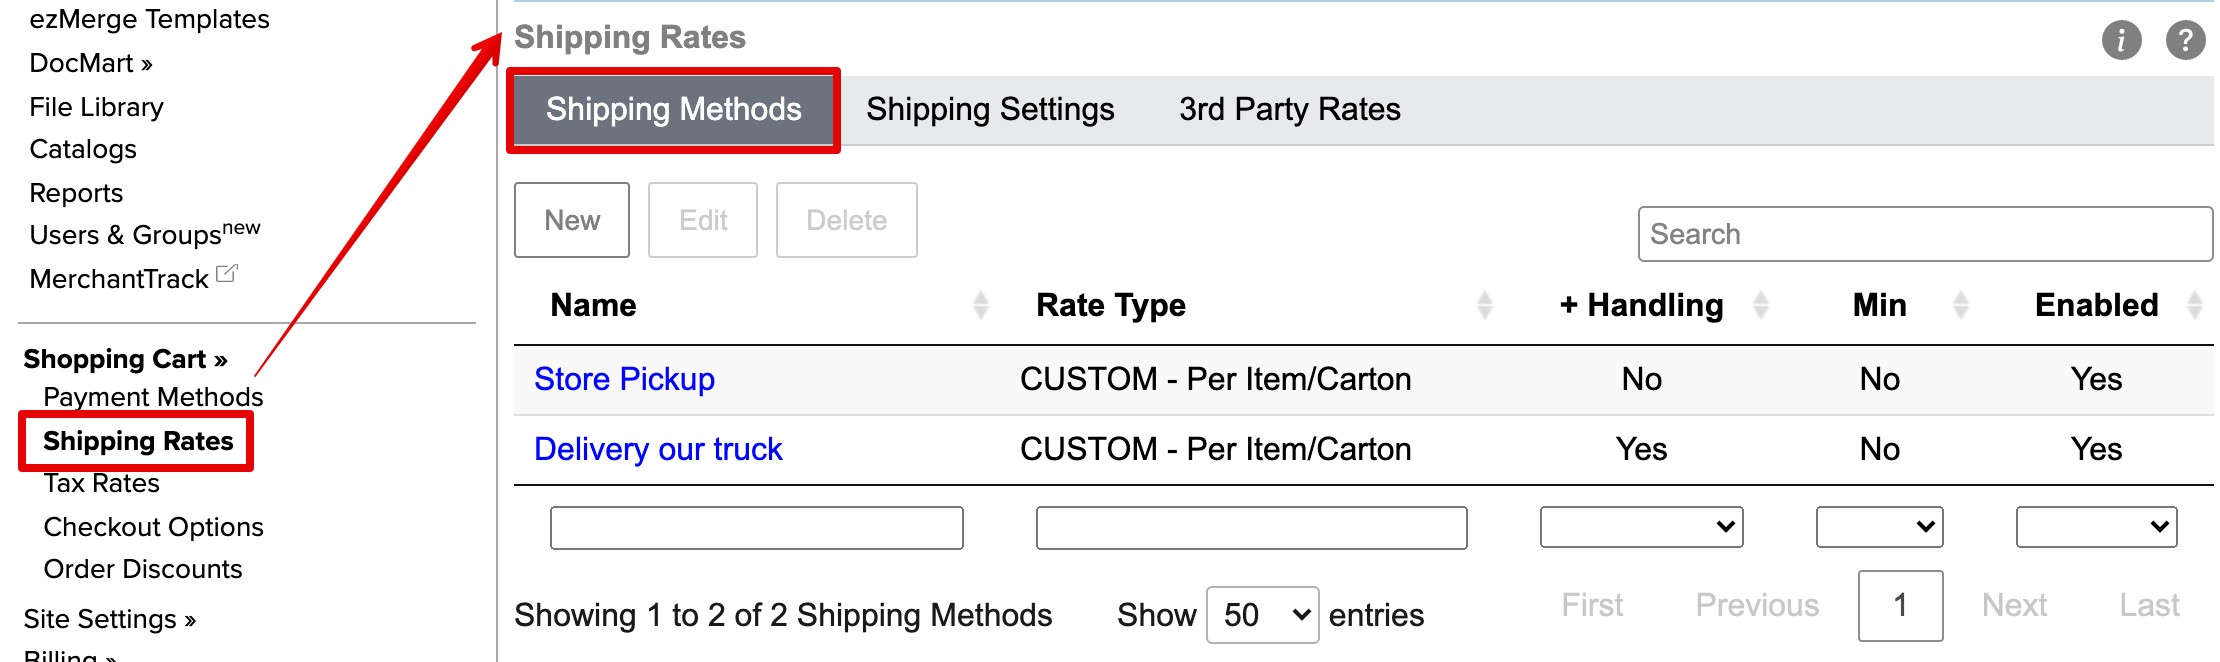 Shipping_Rates_2021-04-27_15-33-40.png